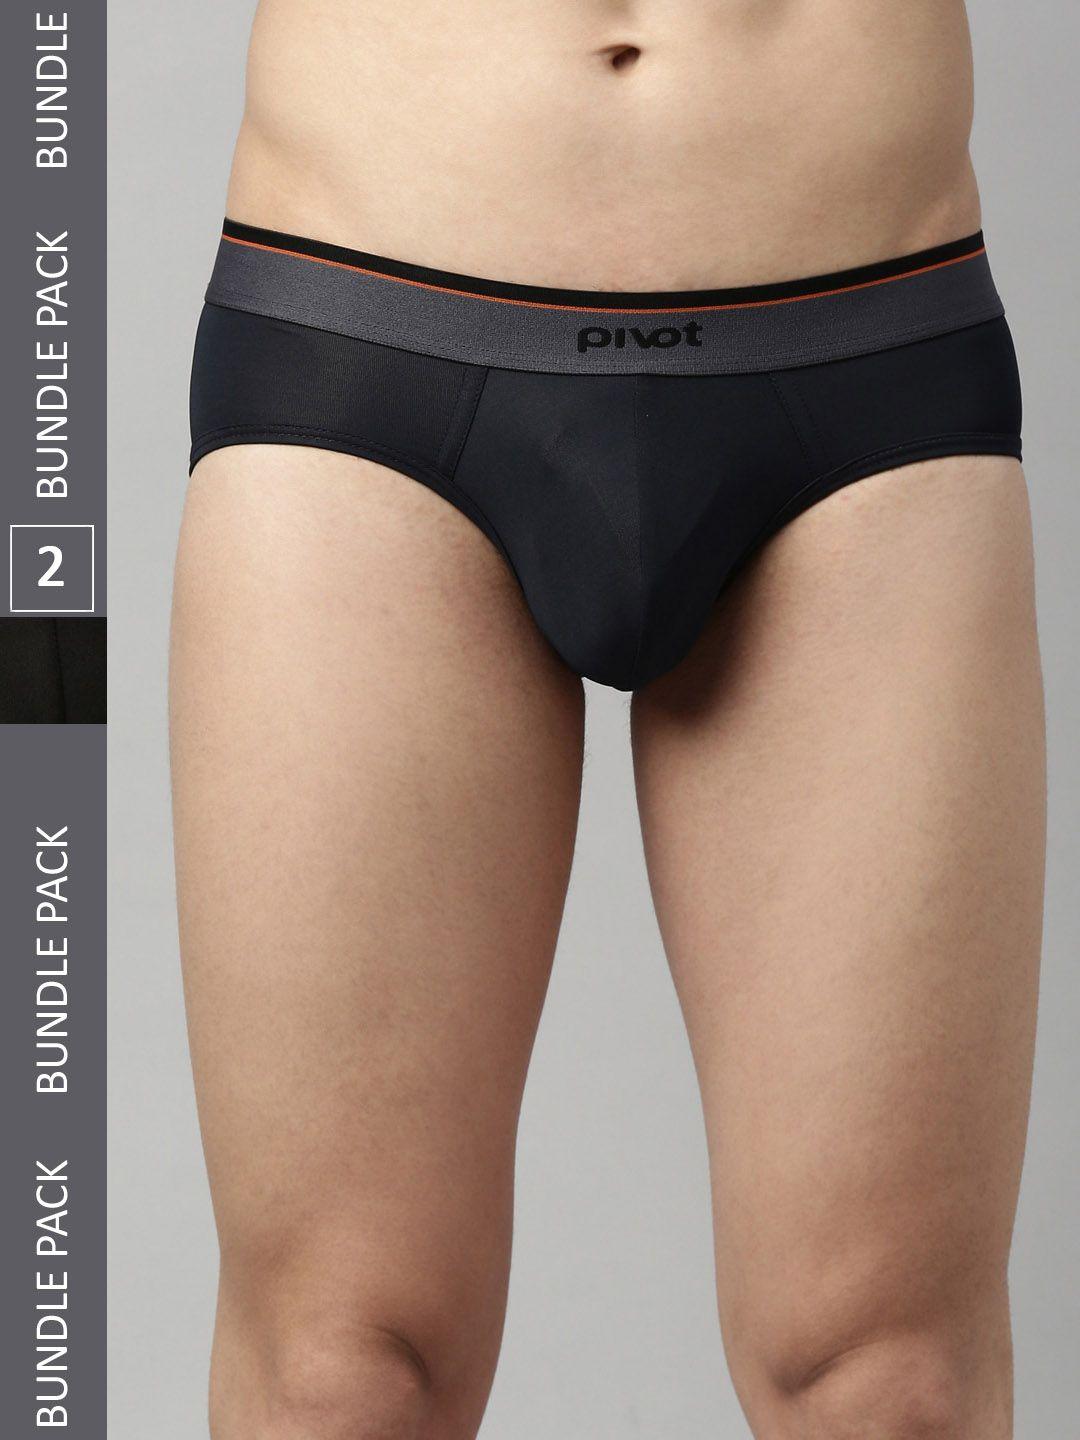 pivot men pack of 2 assorted mid rise basic briefs